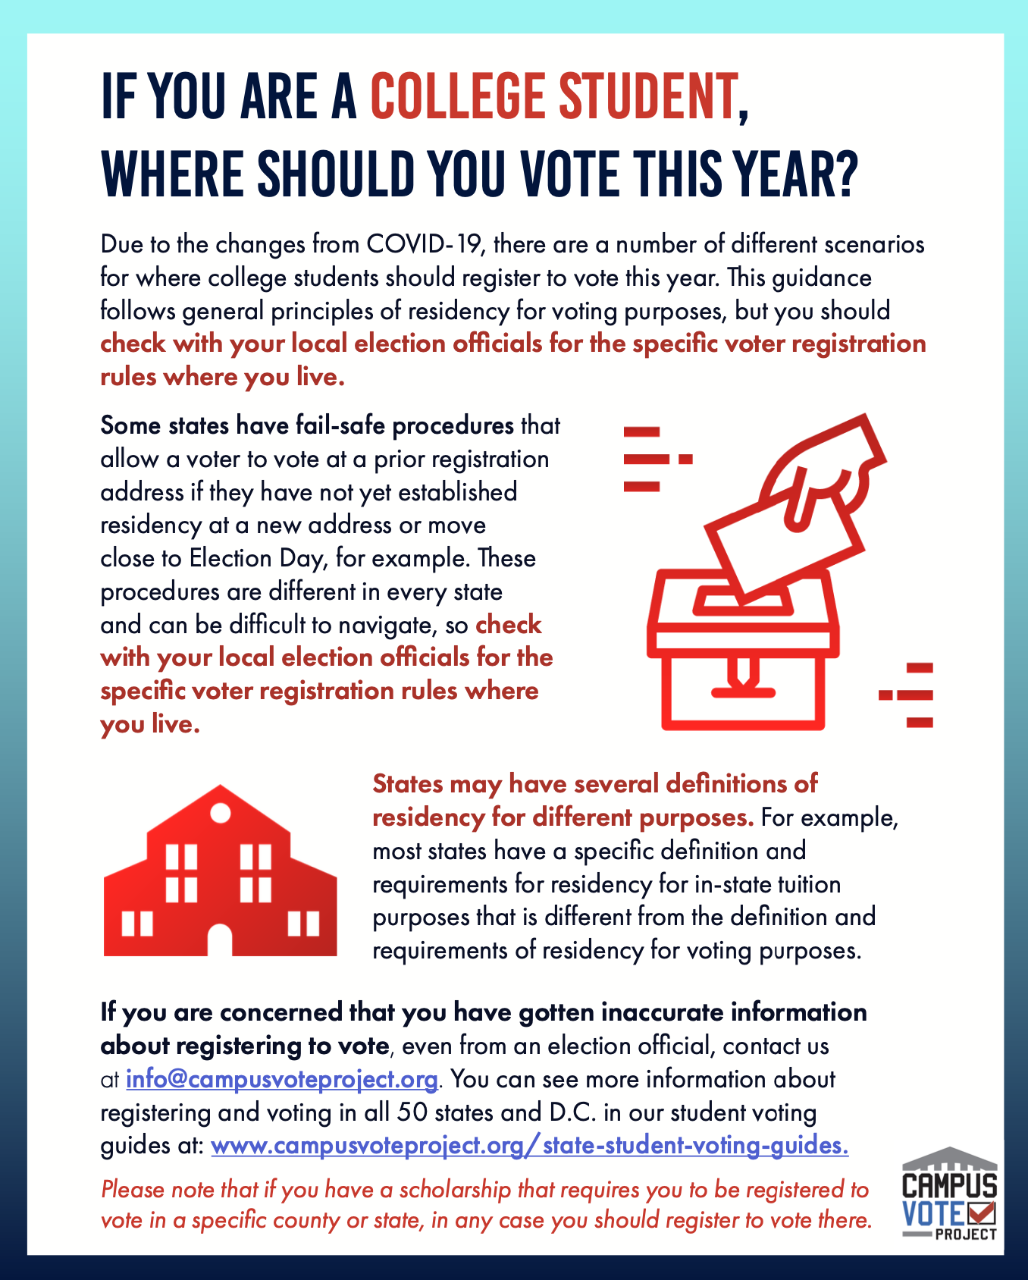 If you are a college student, where should you vote this year? due to the changes from covid-19, there are a number of different scenarios for where college students should register to vote this year. this guidance follows general principles of residency for voting purposes, but you should check with your local election officials for the specific voter registration rules where you live. some states have fail-safe procedures that allow a voter to vote at a prior registration address if they have not yet established residency at a new address or move close to election day, for example. these procedures are different in every state and can be difficult to navigate, so check with your local election officials for the specific voter registration rules where you live. states may have several definitions of residency for different purposes. for example, most states have a specific definition and requirements for residency for in-state tuition purposes that is different from the definition and requirements of residency for voting purposes. if you are concerned that you have gotten inaccurate information about registering to vote, even from an election official, contact info@campusvoteproject.org. You can see more information about registering and voting in all 50 states and d.c. in the student voting guides at www.campusvoteproject.org/state-student-voting-guides. please note that if you have a scholarship that requires you to be registered to vote in a specific county or state, in any case you should register to vote there. 